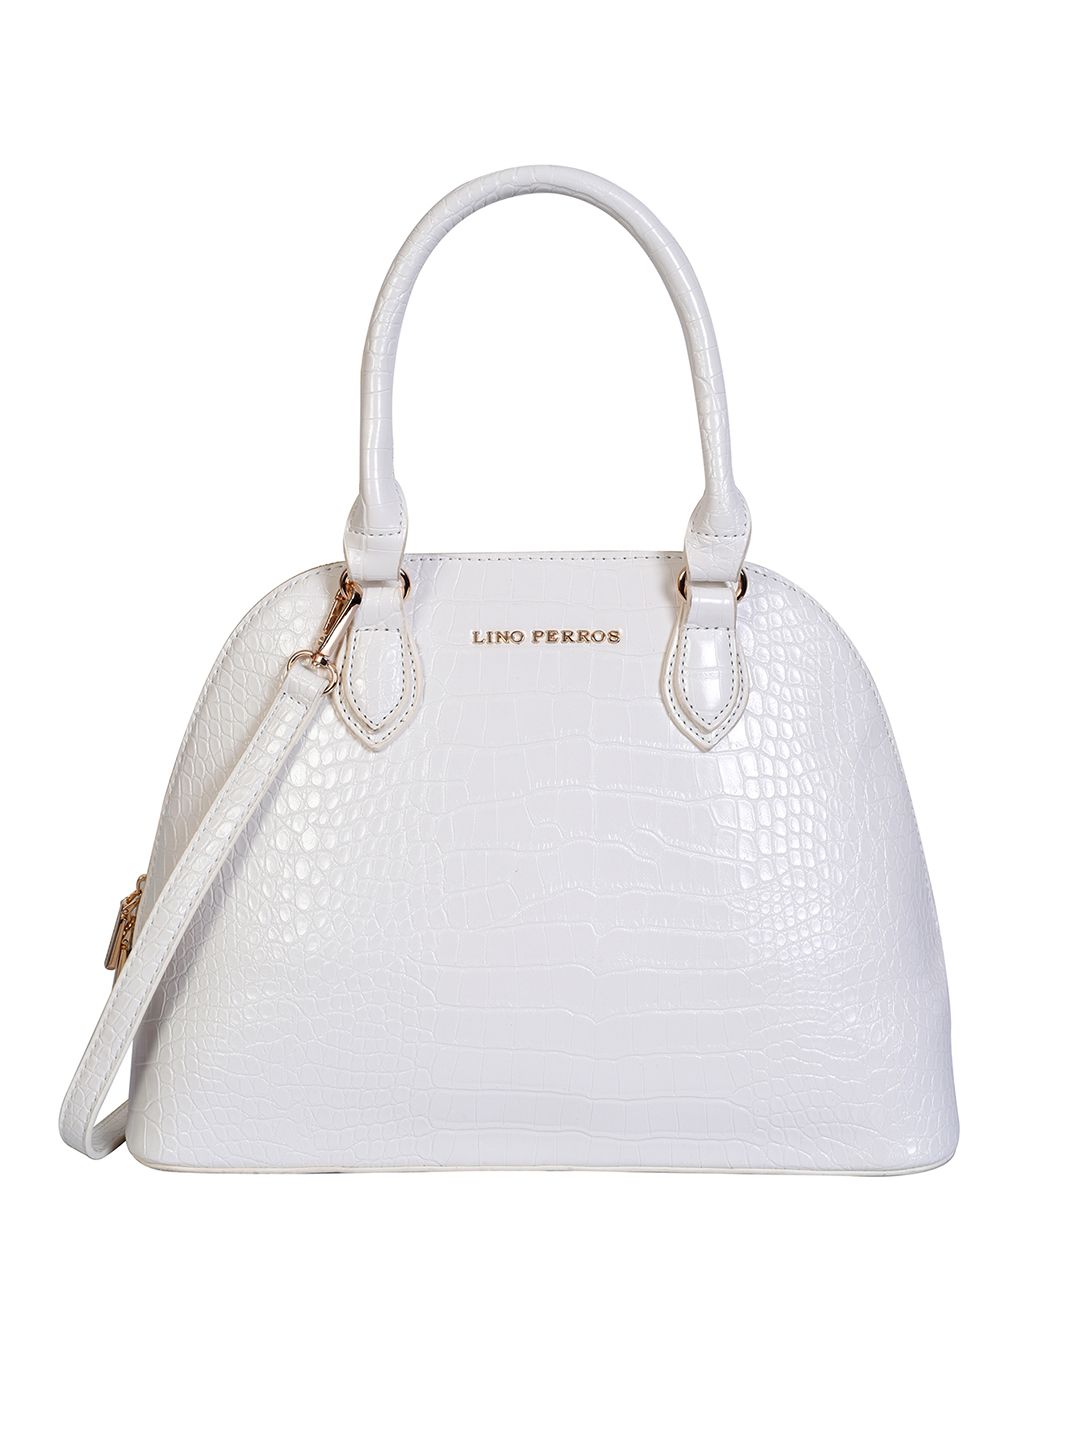 Lino Perros White Croc-Textured Handheld Bag with Detachable Sling Strap Price in India